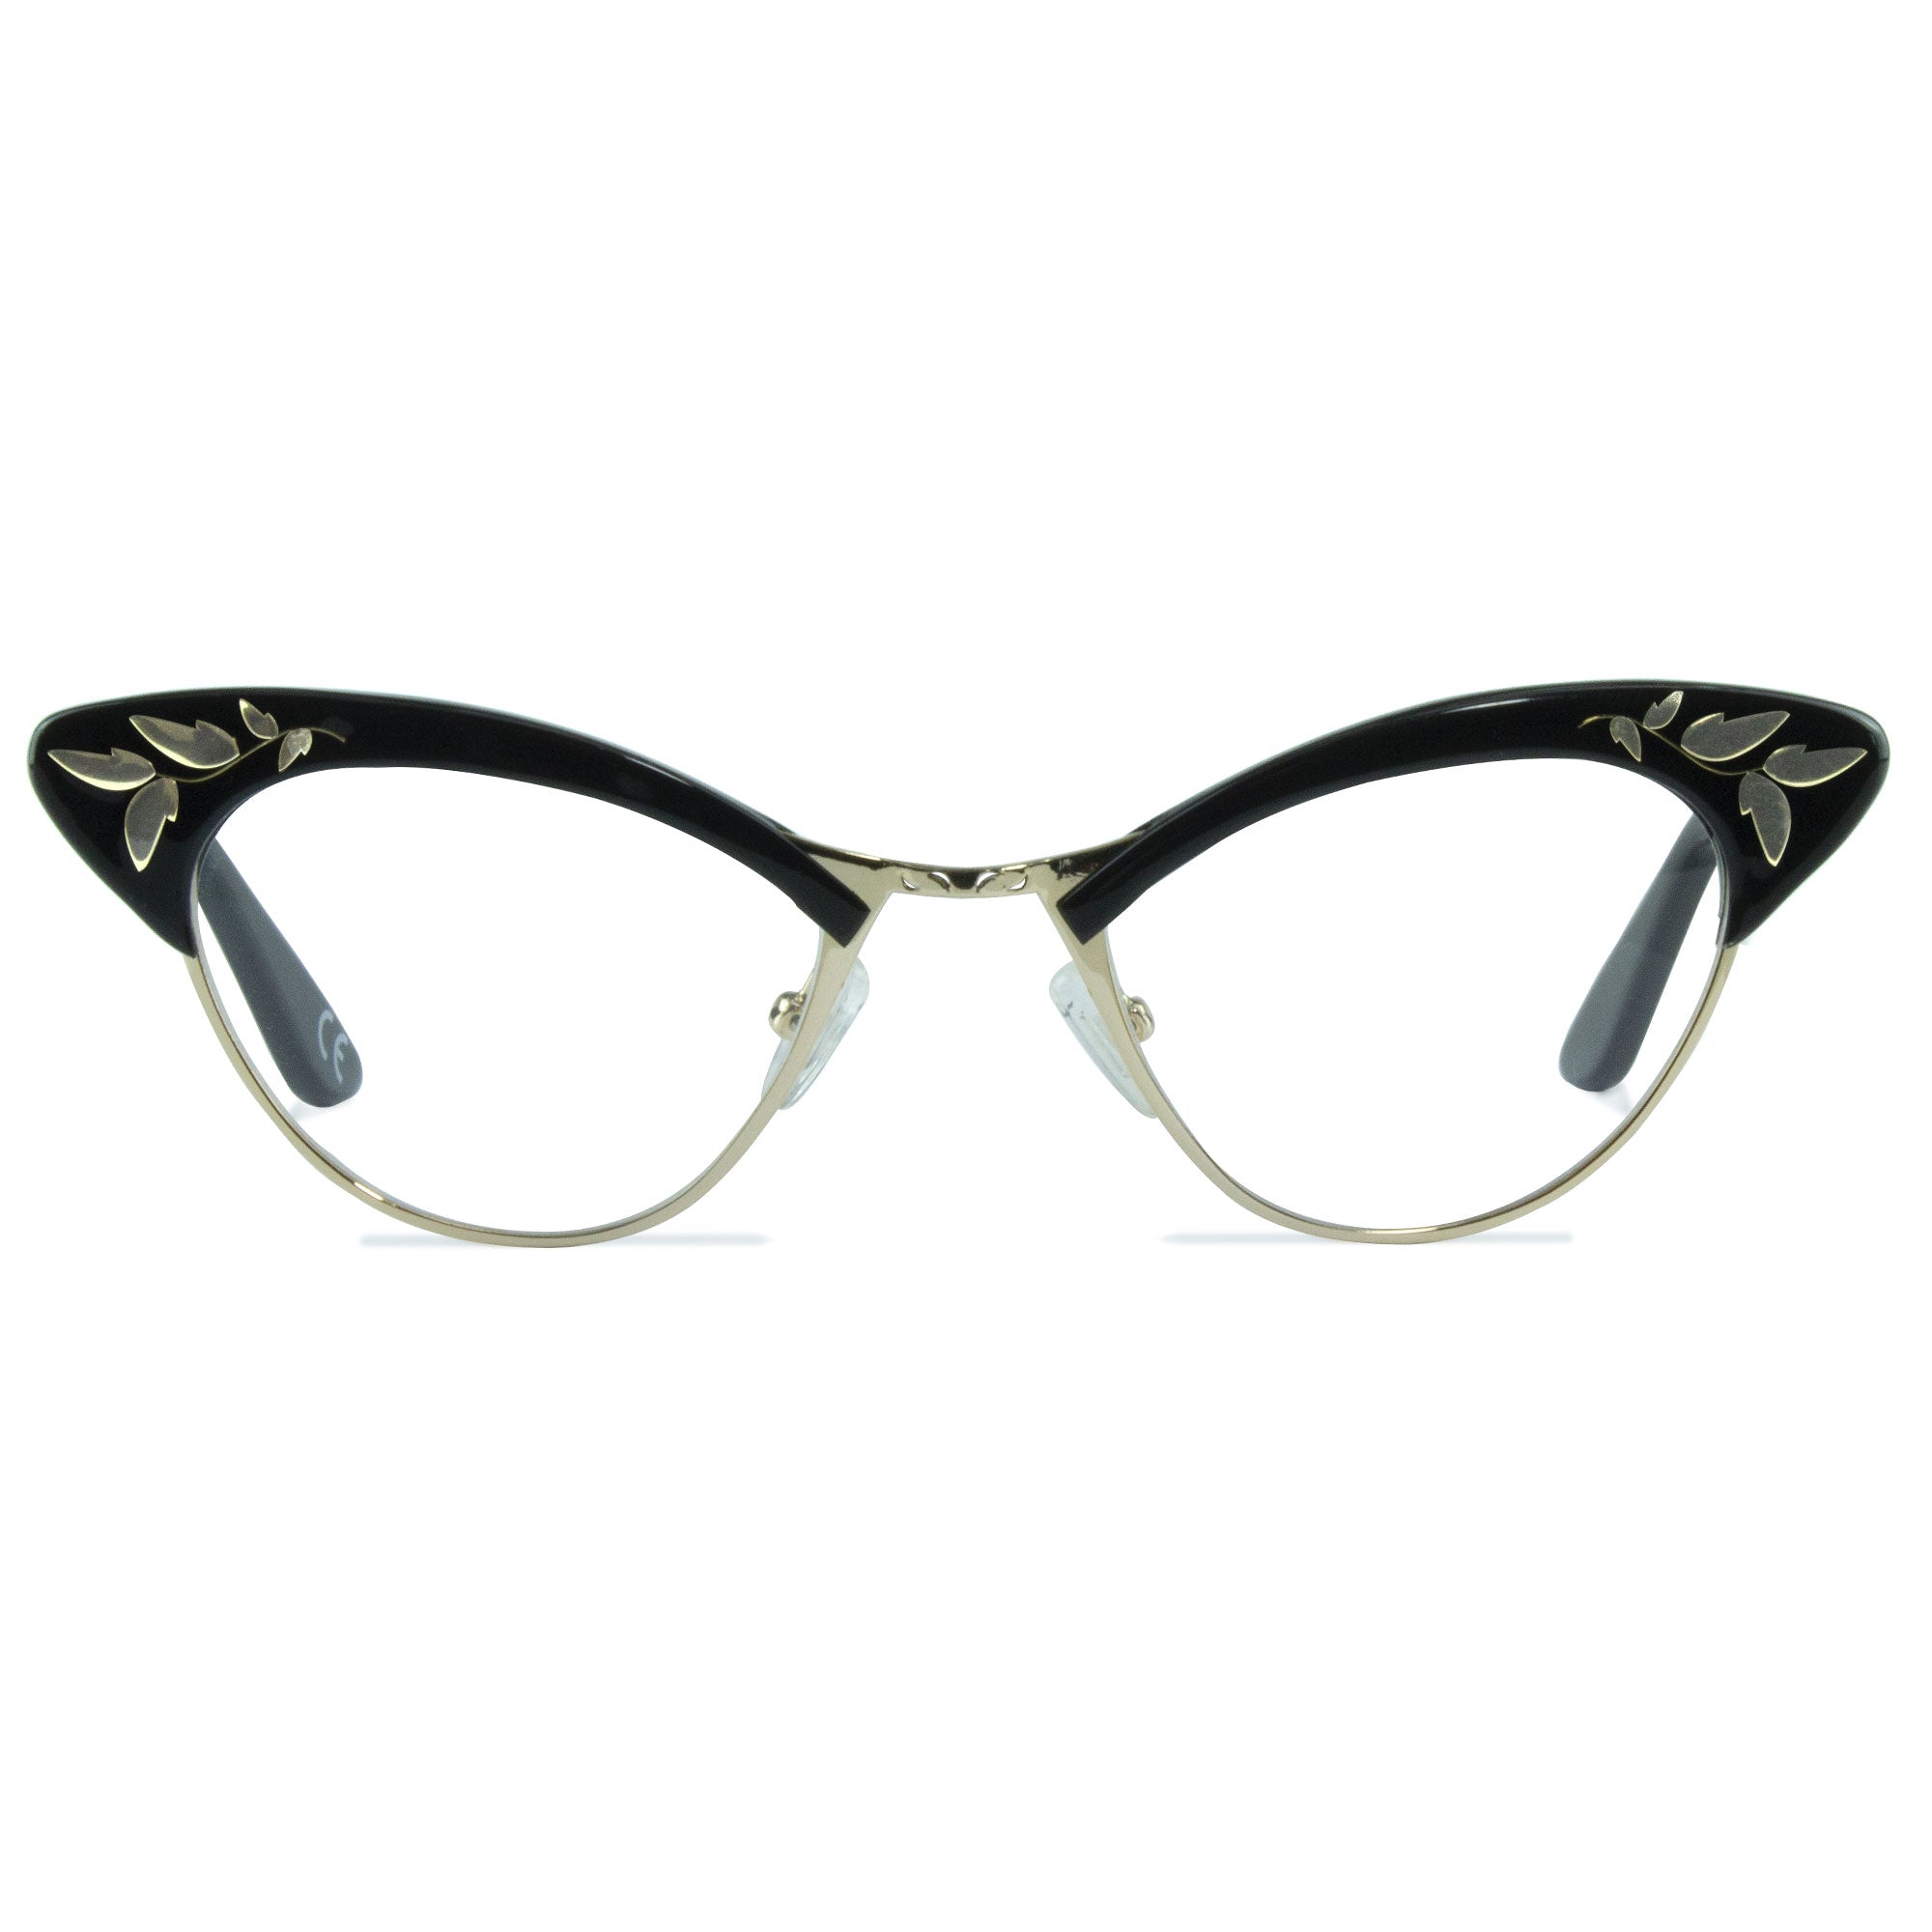 cat eye glasses black and gold frame front view